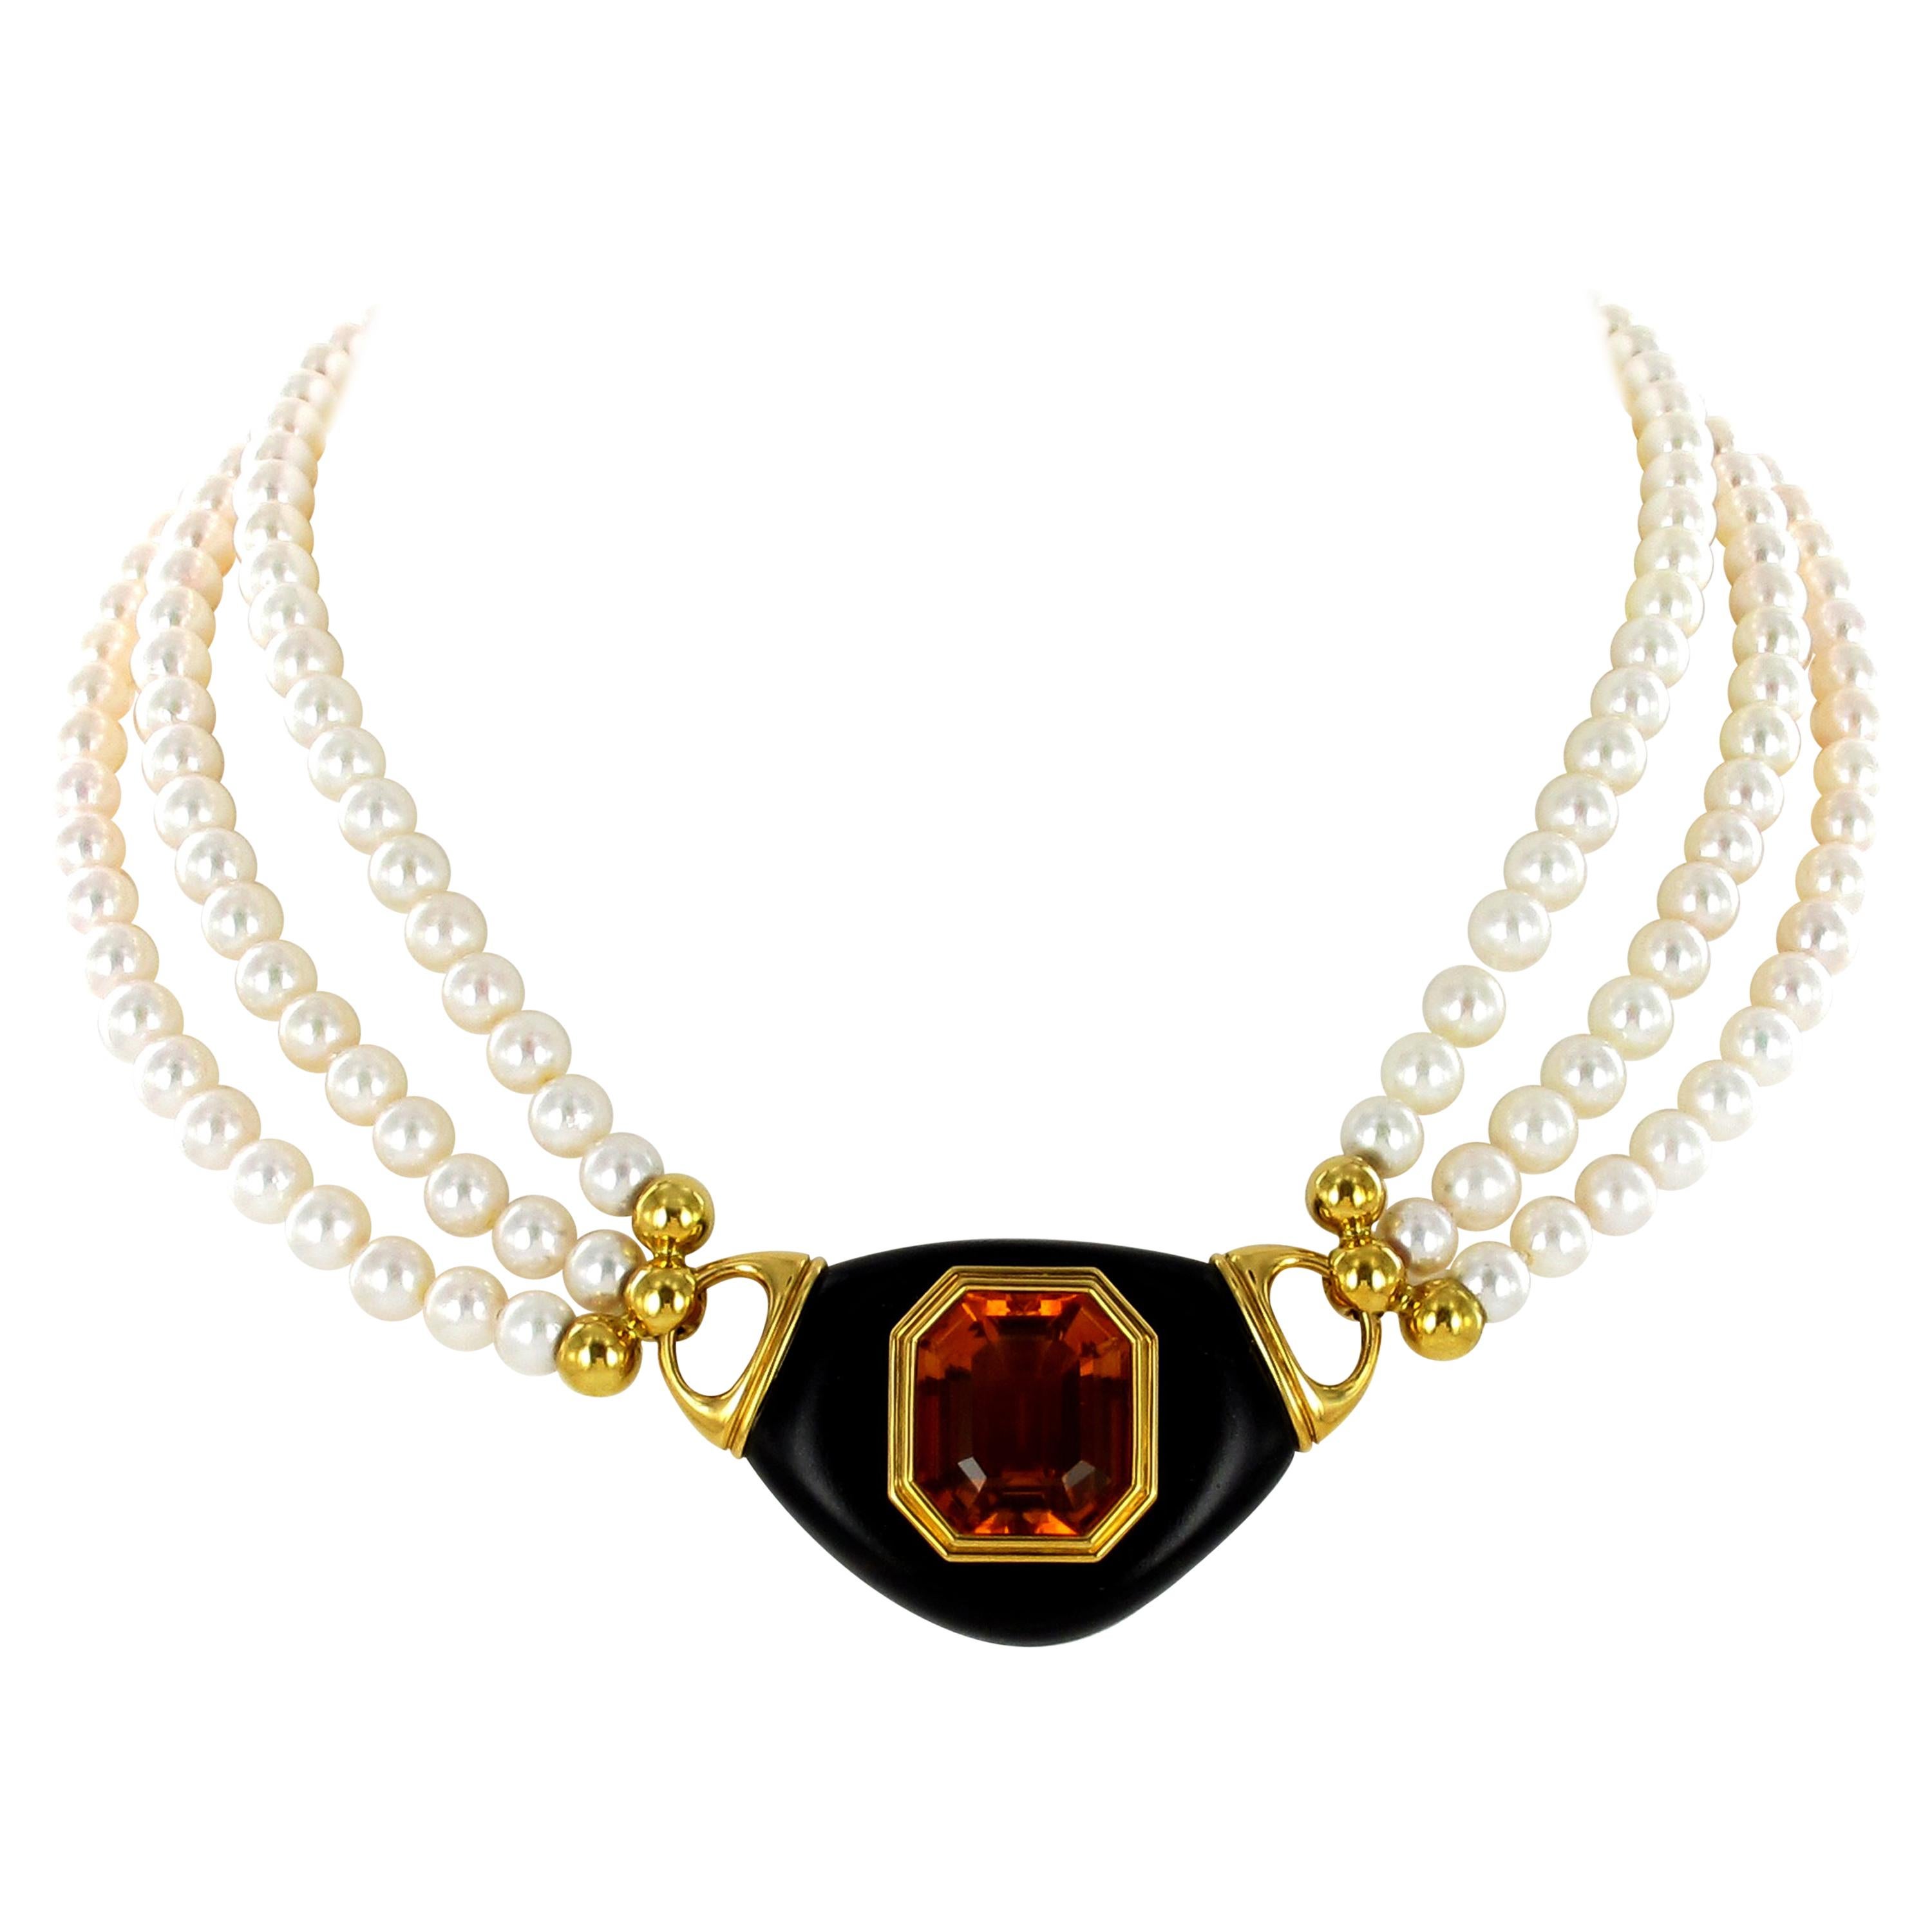 Exquisite Citrine, Ebony and Akoya Cultured Pearl Necklace